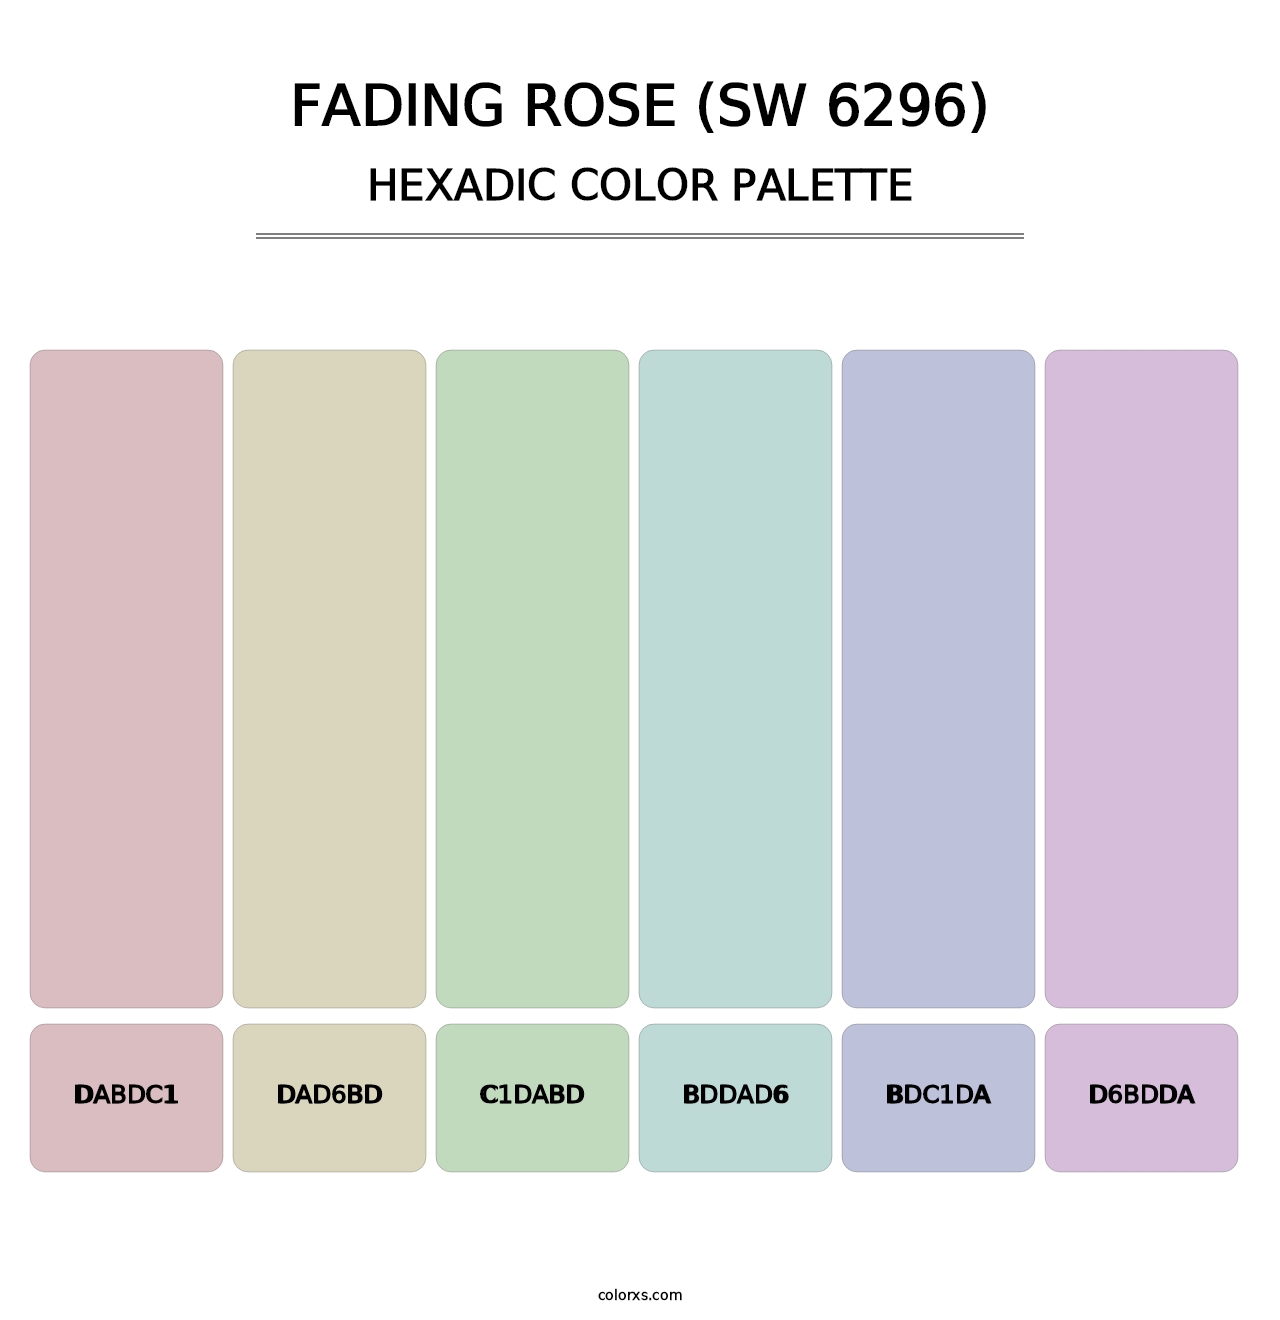 Fading Rose (SW 6296) - Hexadic Color Palette